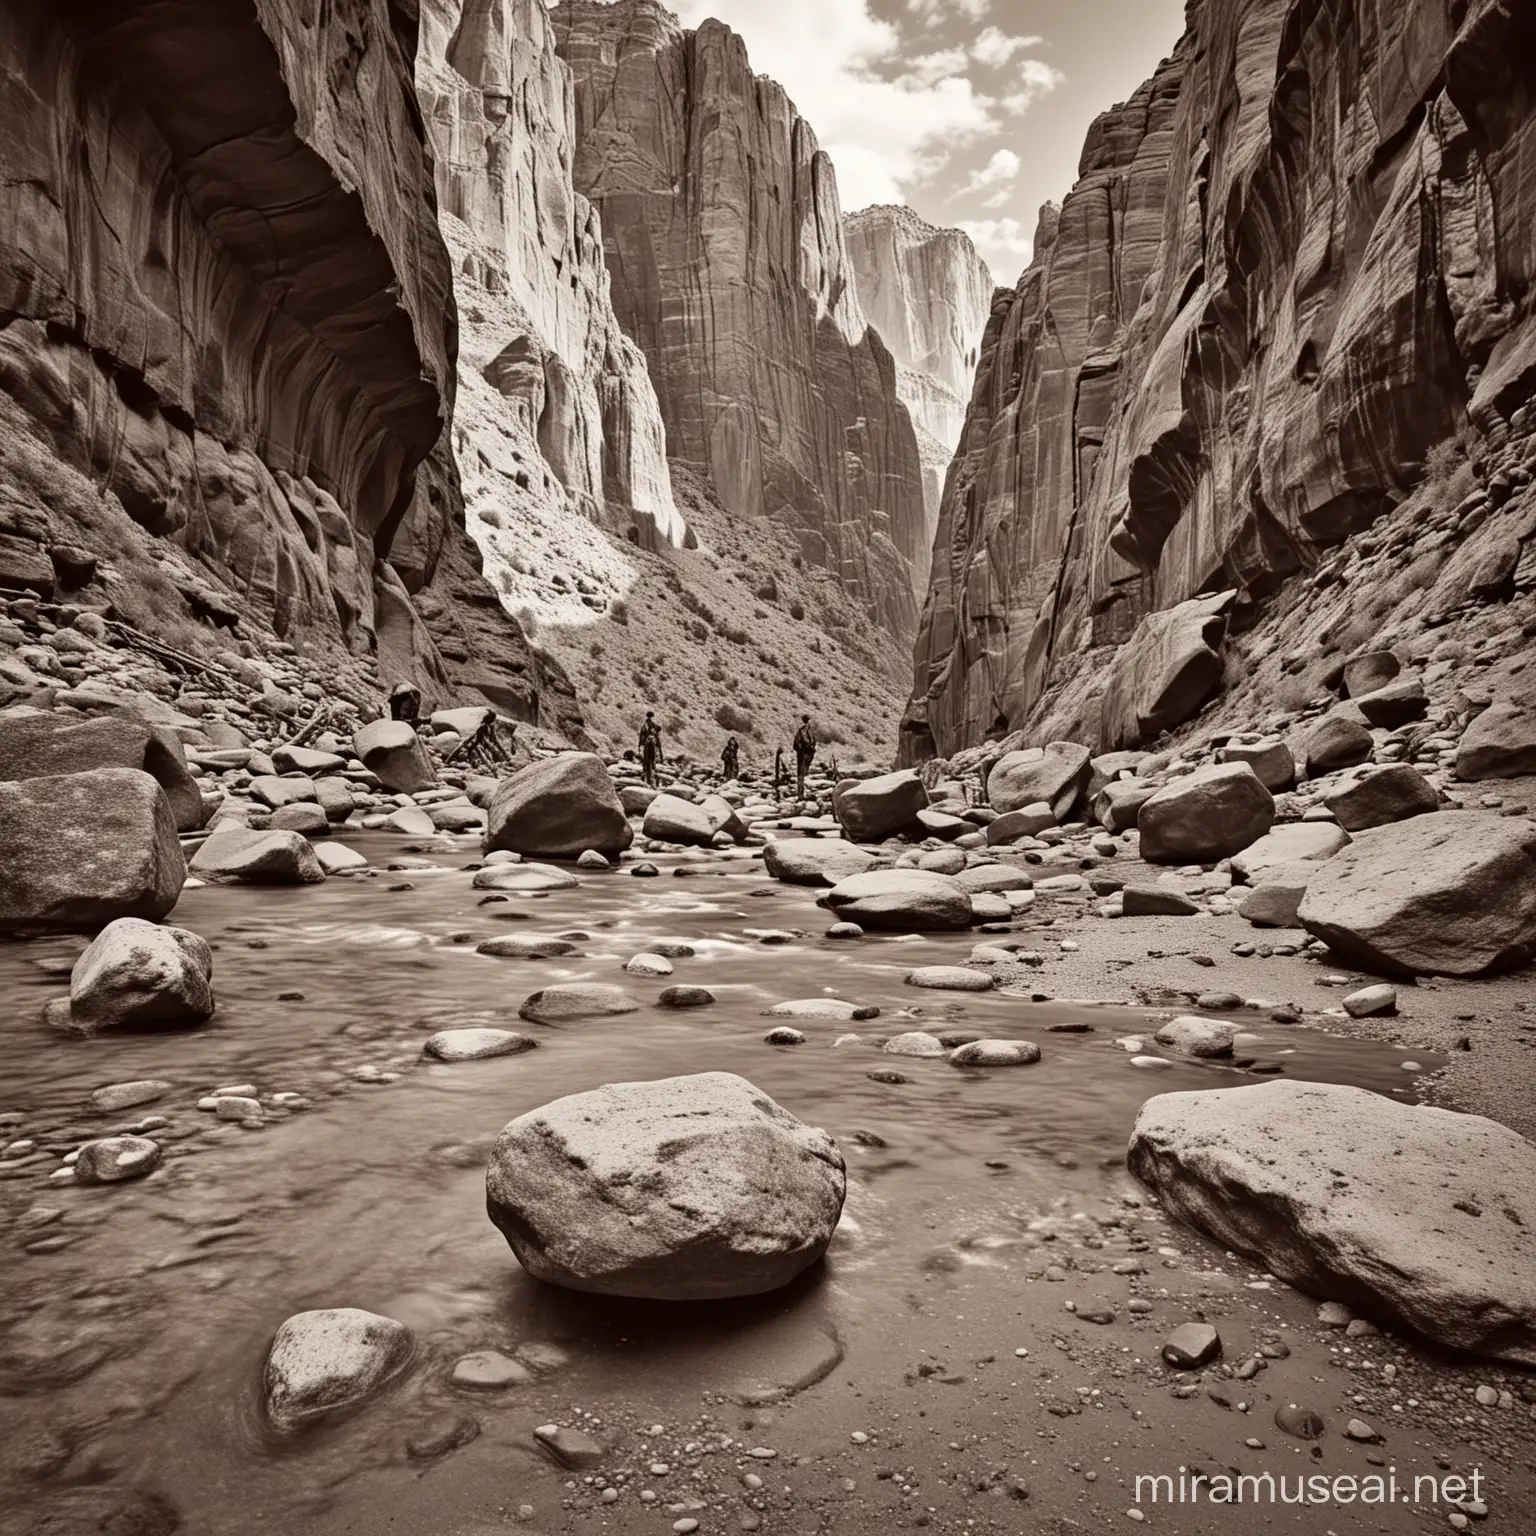 A scene from a canyon in the old west. The image is on ground level in a hiding spot behind a boulder.